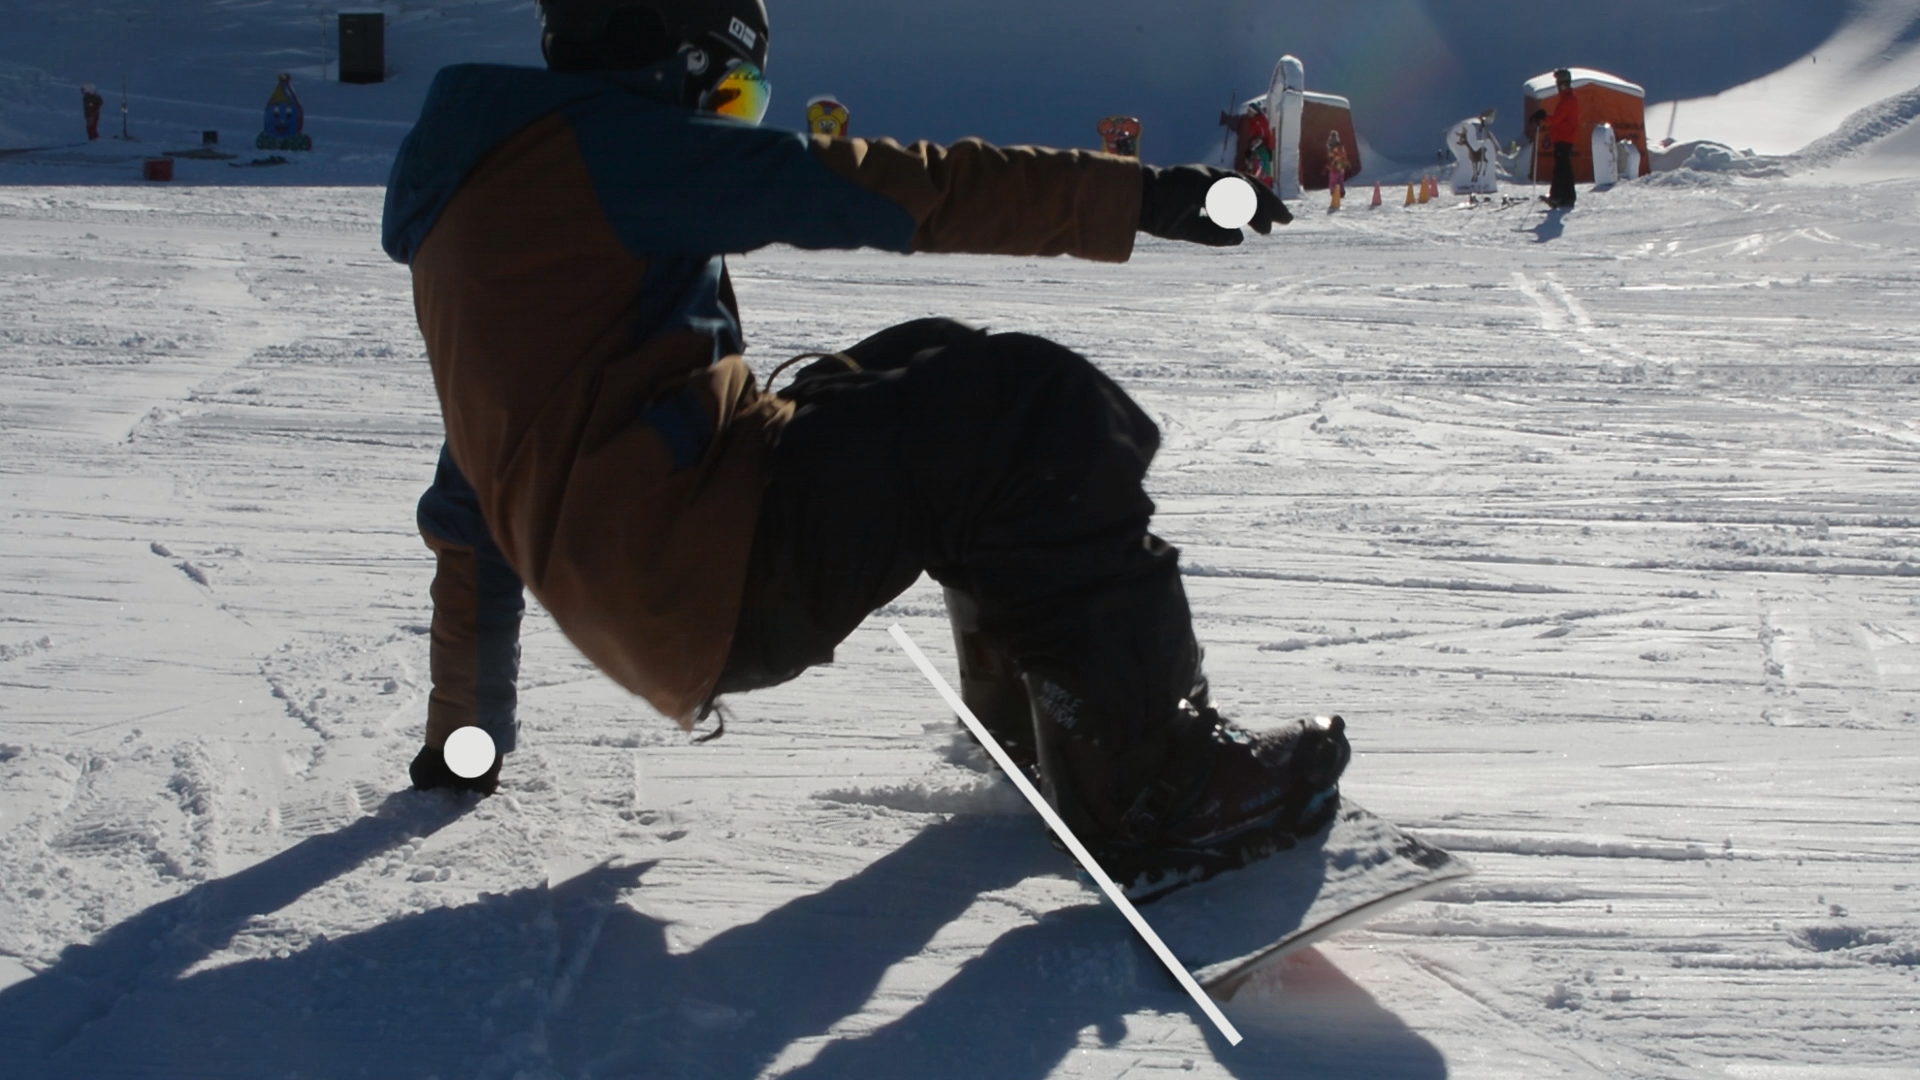 Stand up on your snowboard